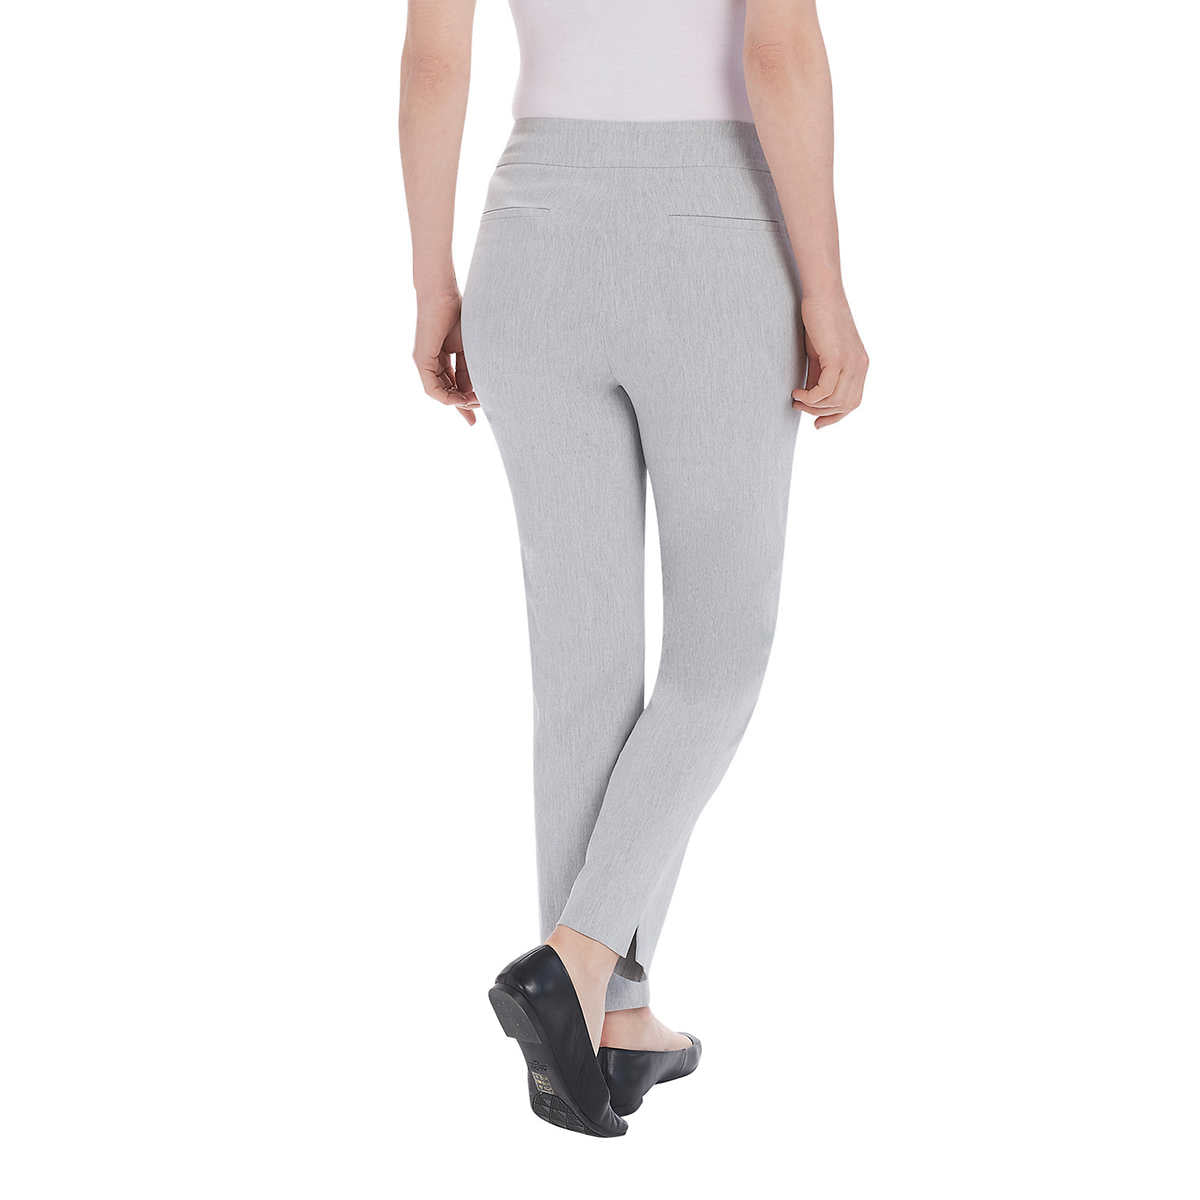 Hilary Radley Ladies' Pull-On Pant with Tummy Control